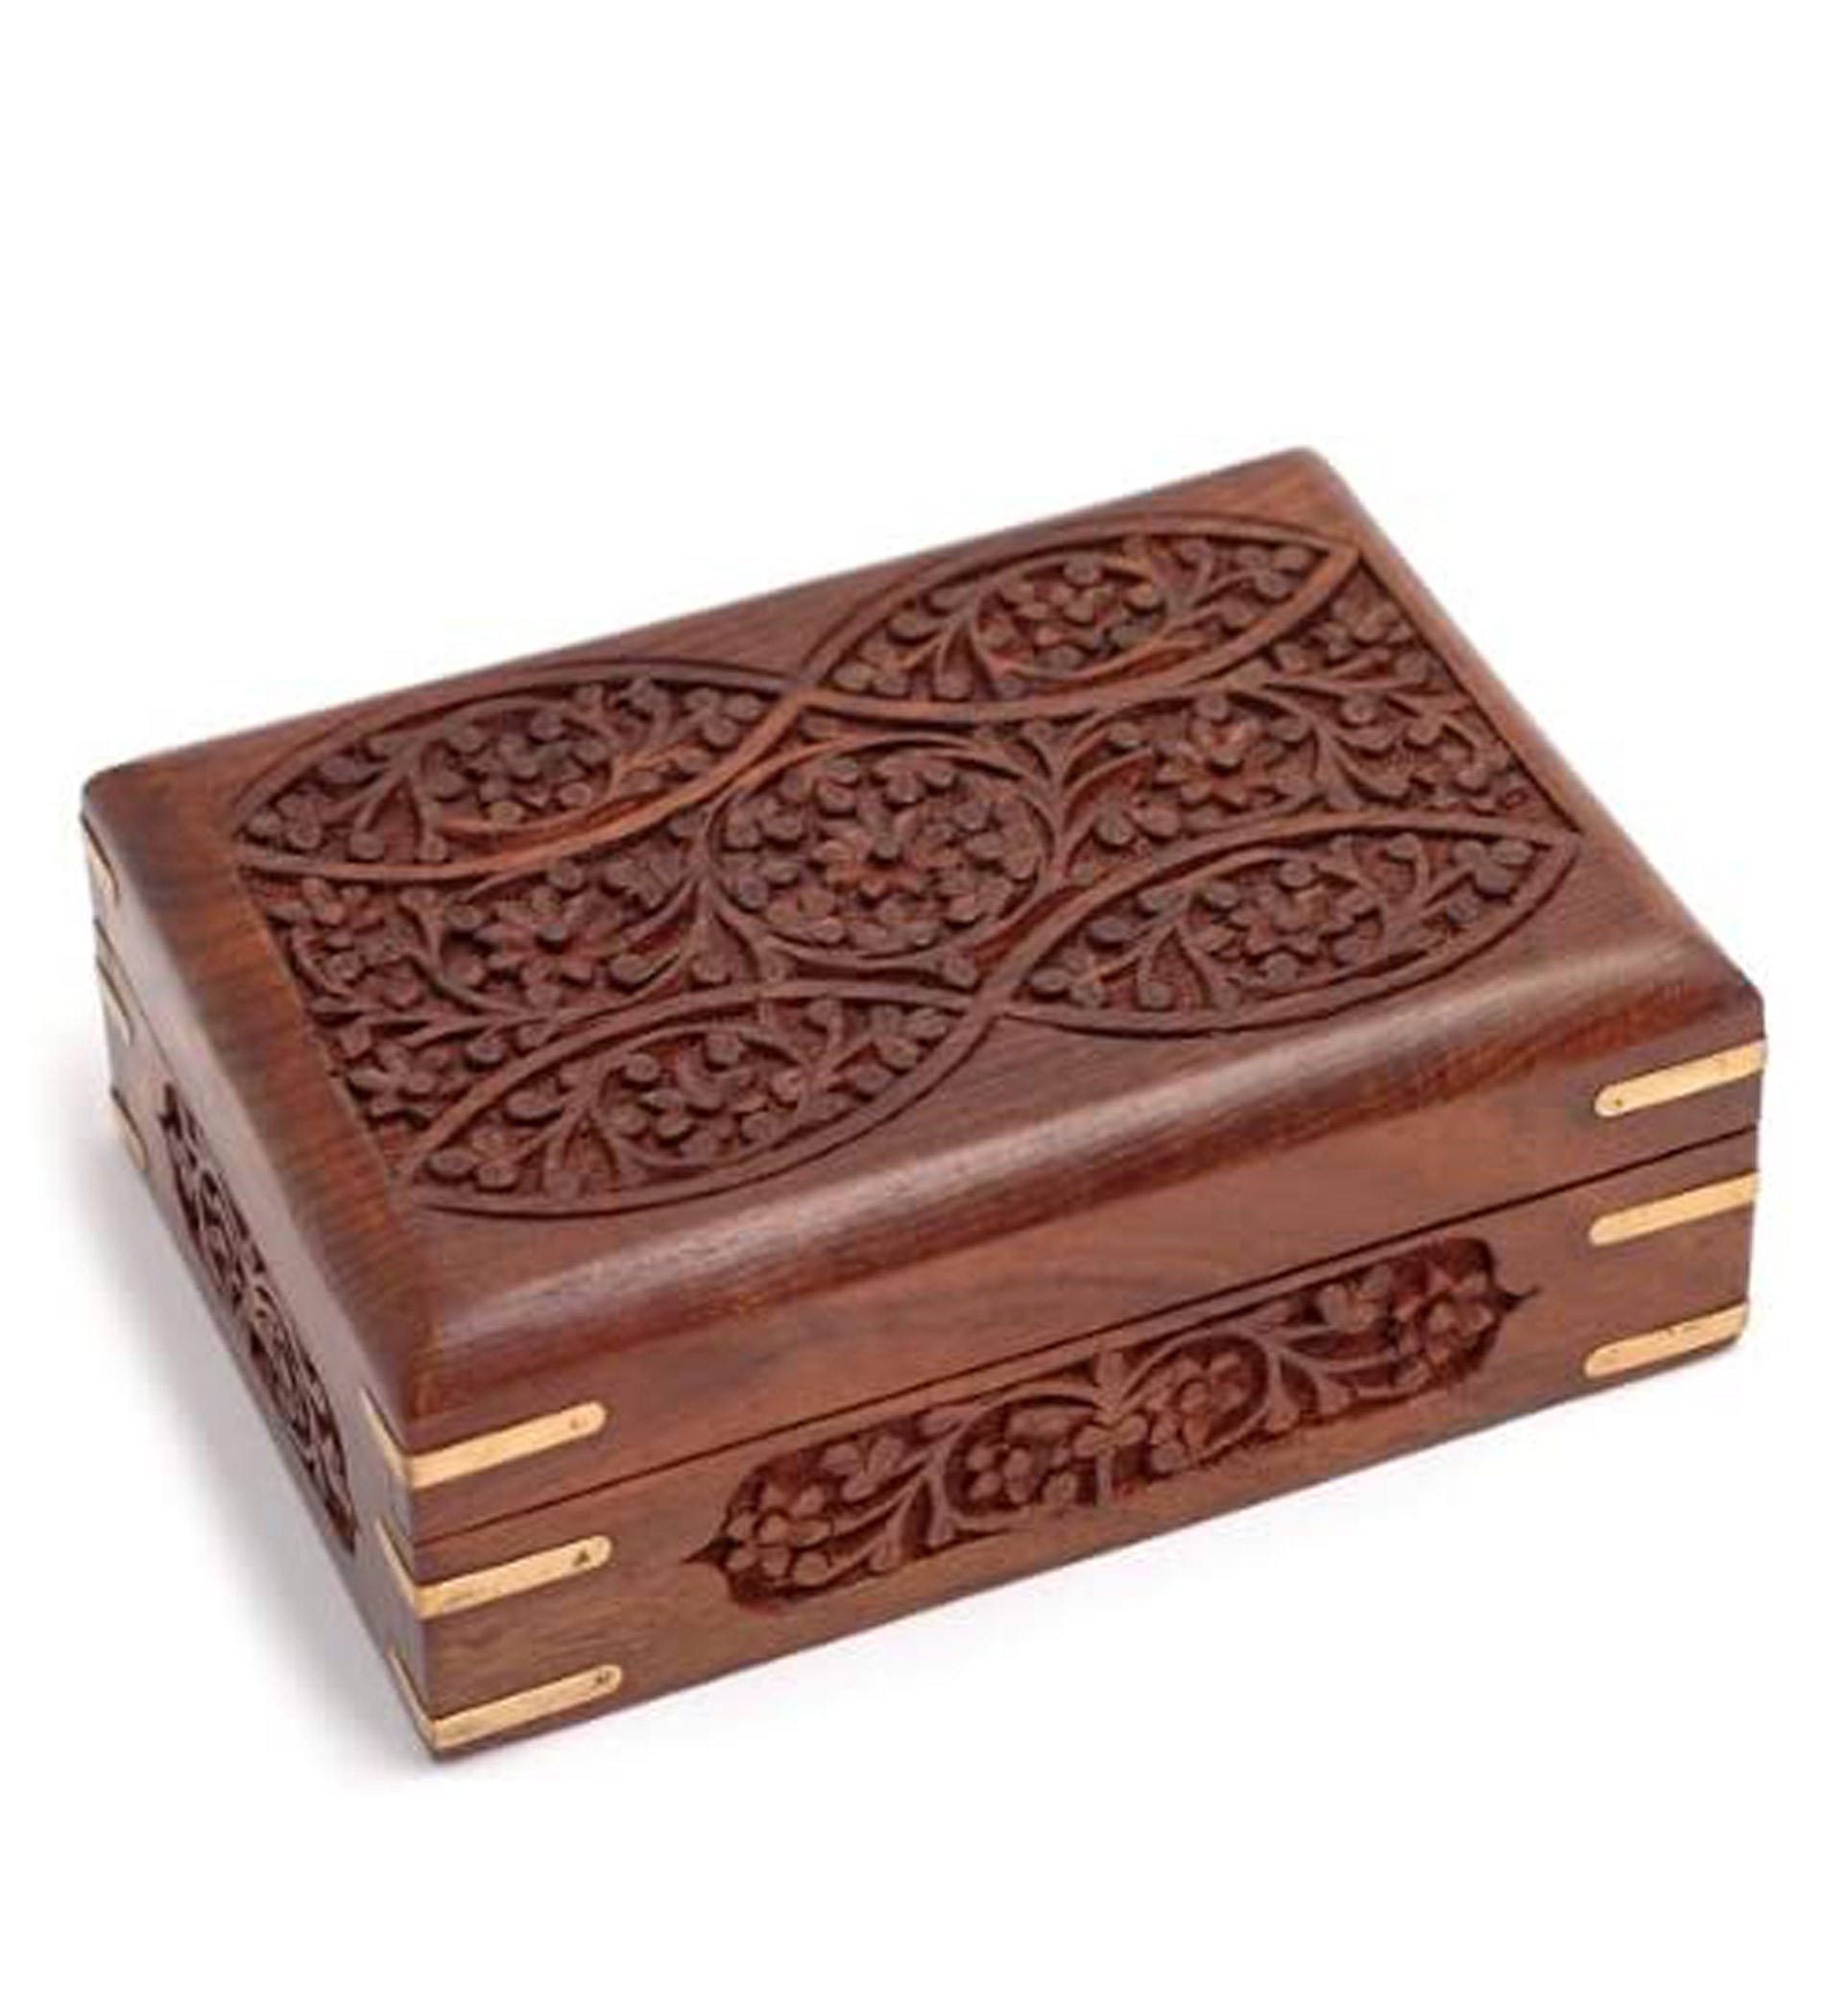 Hand Carved Ornate Wooden Box With Brass Corners